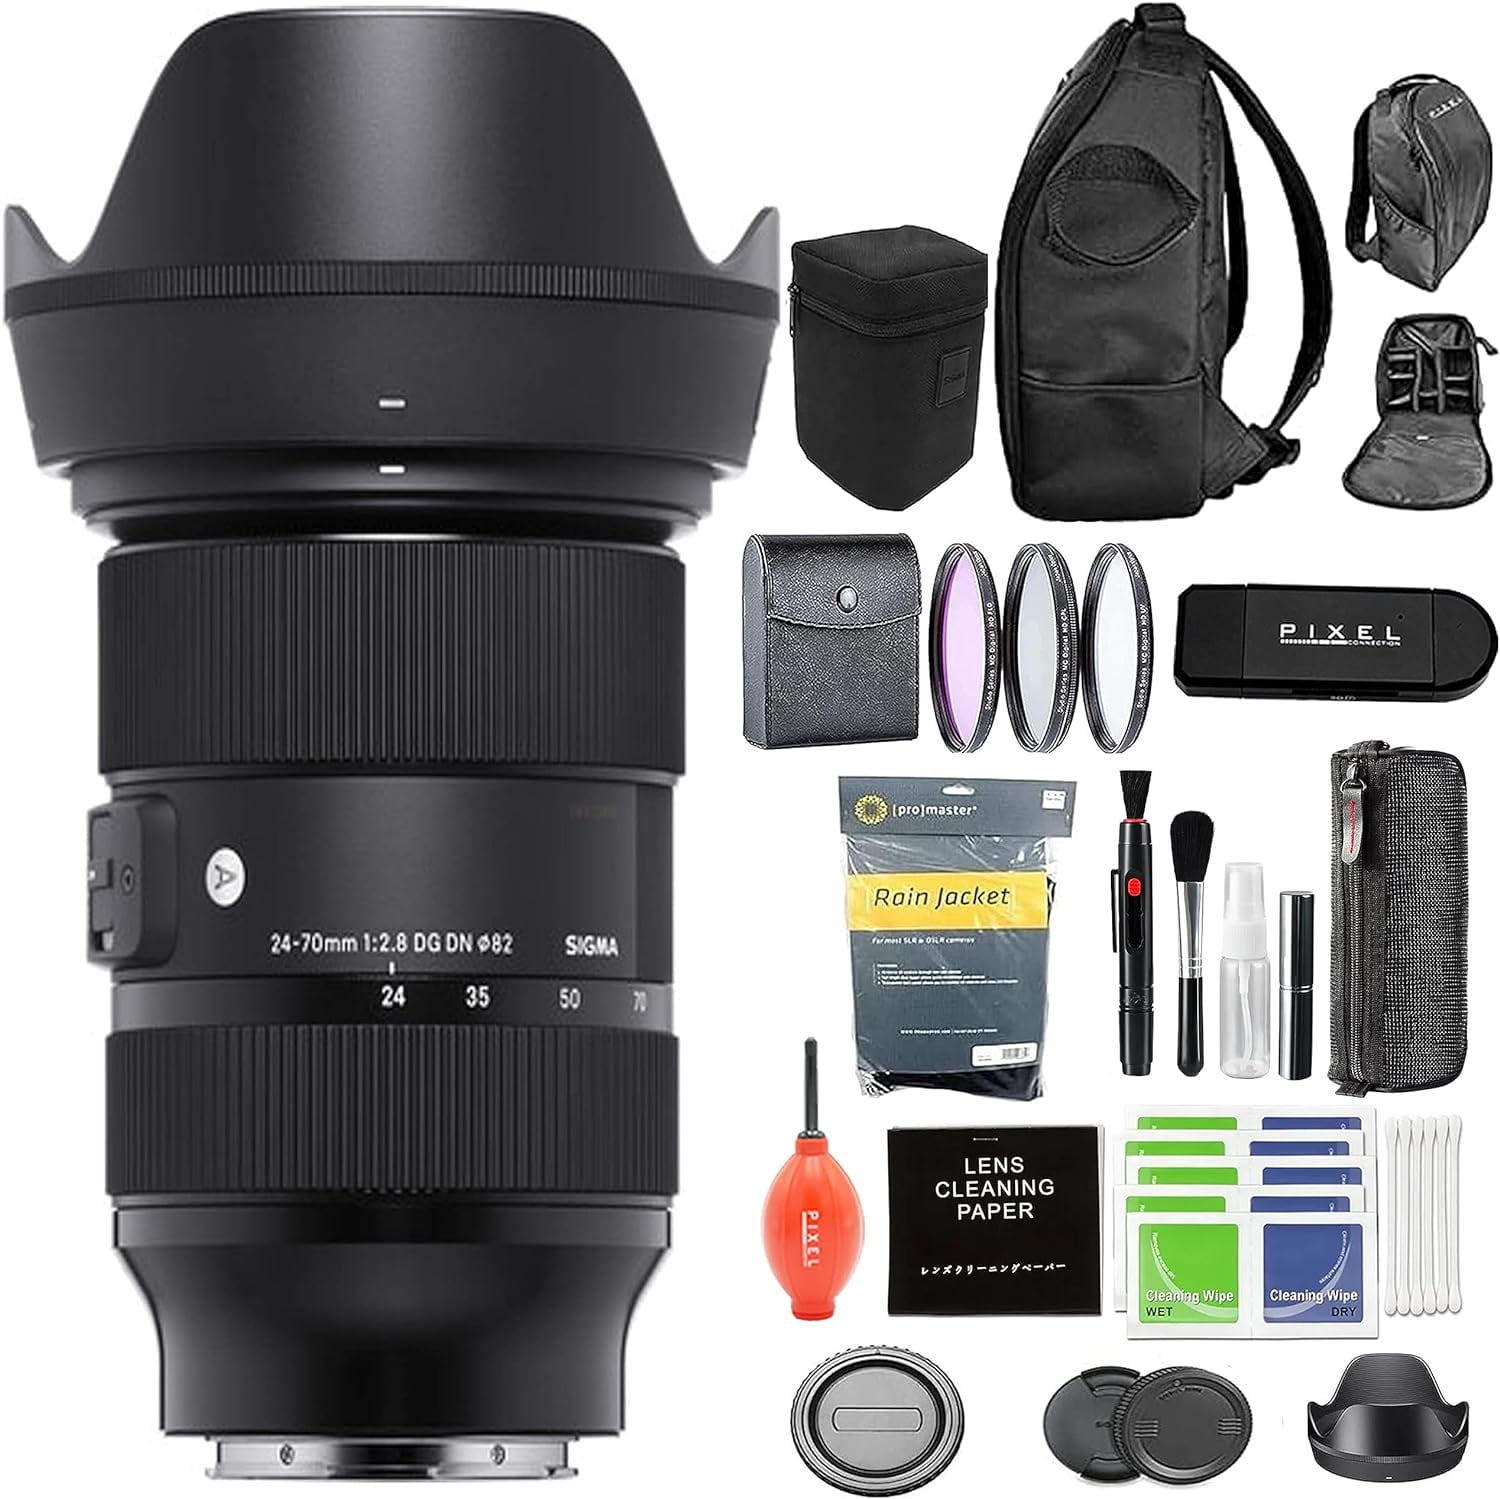 Sigma 24-70mm F2.8 DG DN Art Lens for Sony - photo/video - by owner -  electronics sale - craigslist